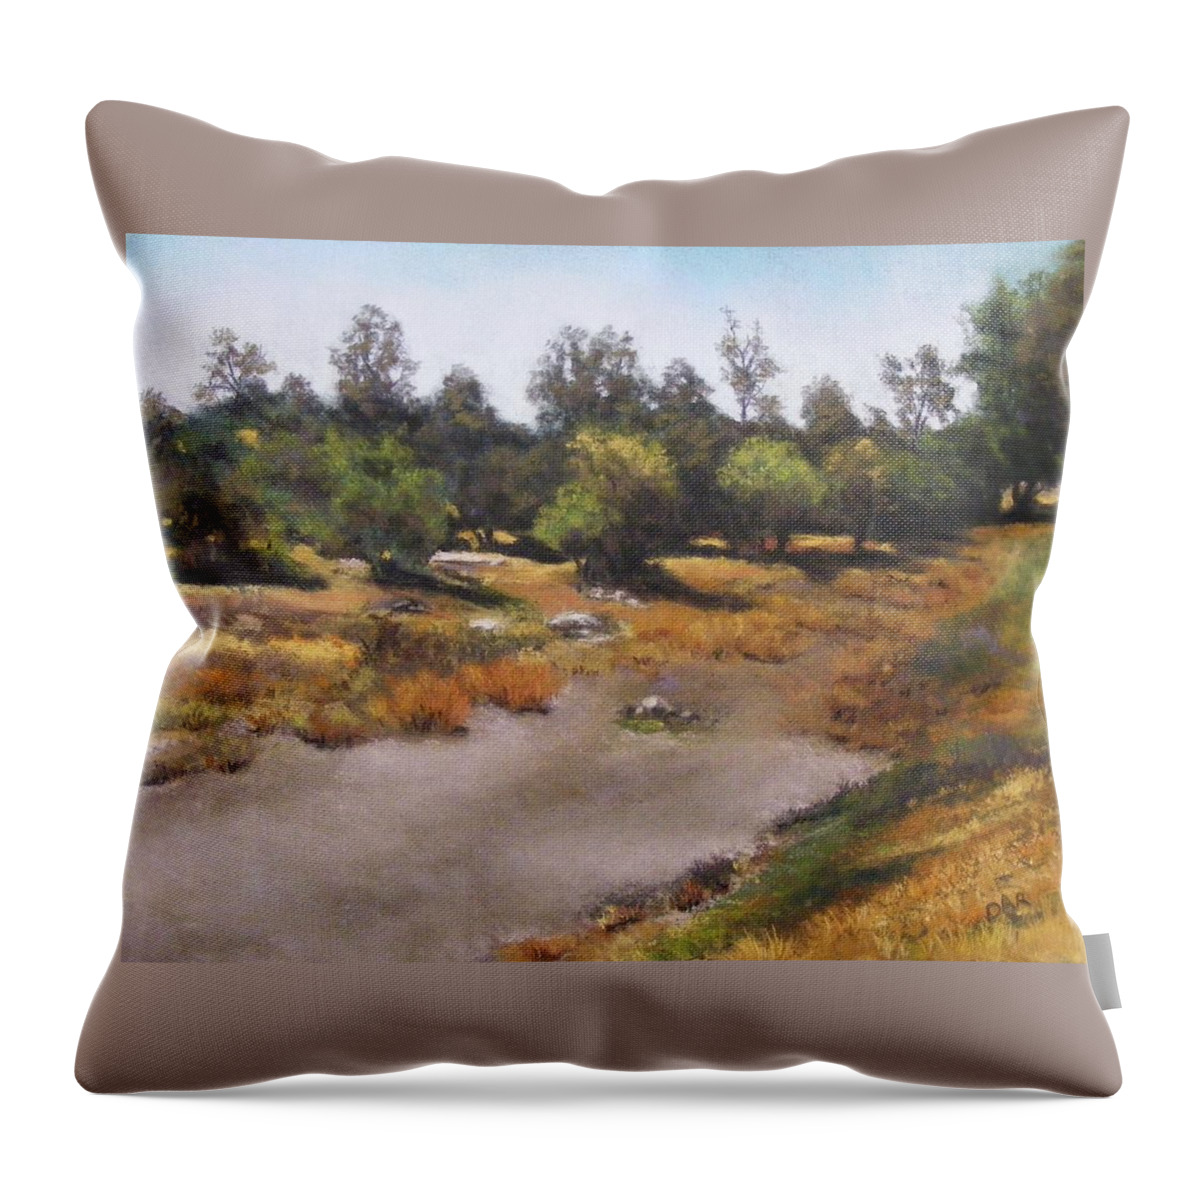 Optimism Throw Pillow featuring the painting Optimism by Darlene Jaeger